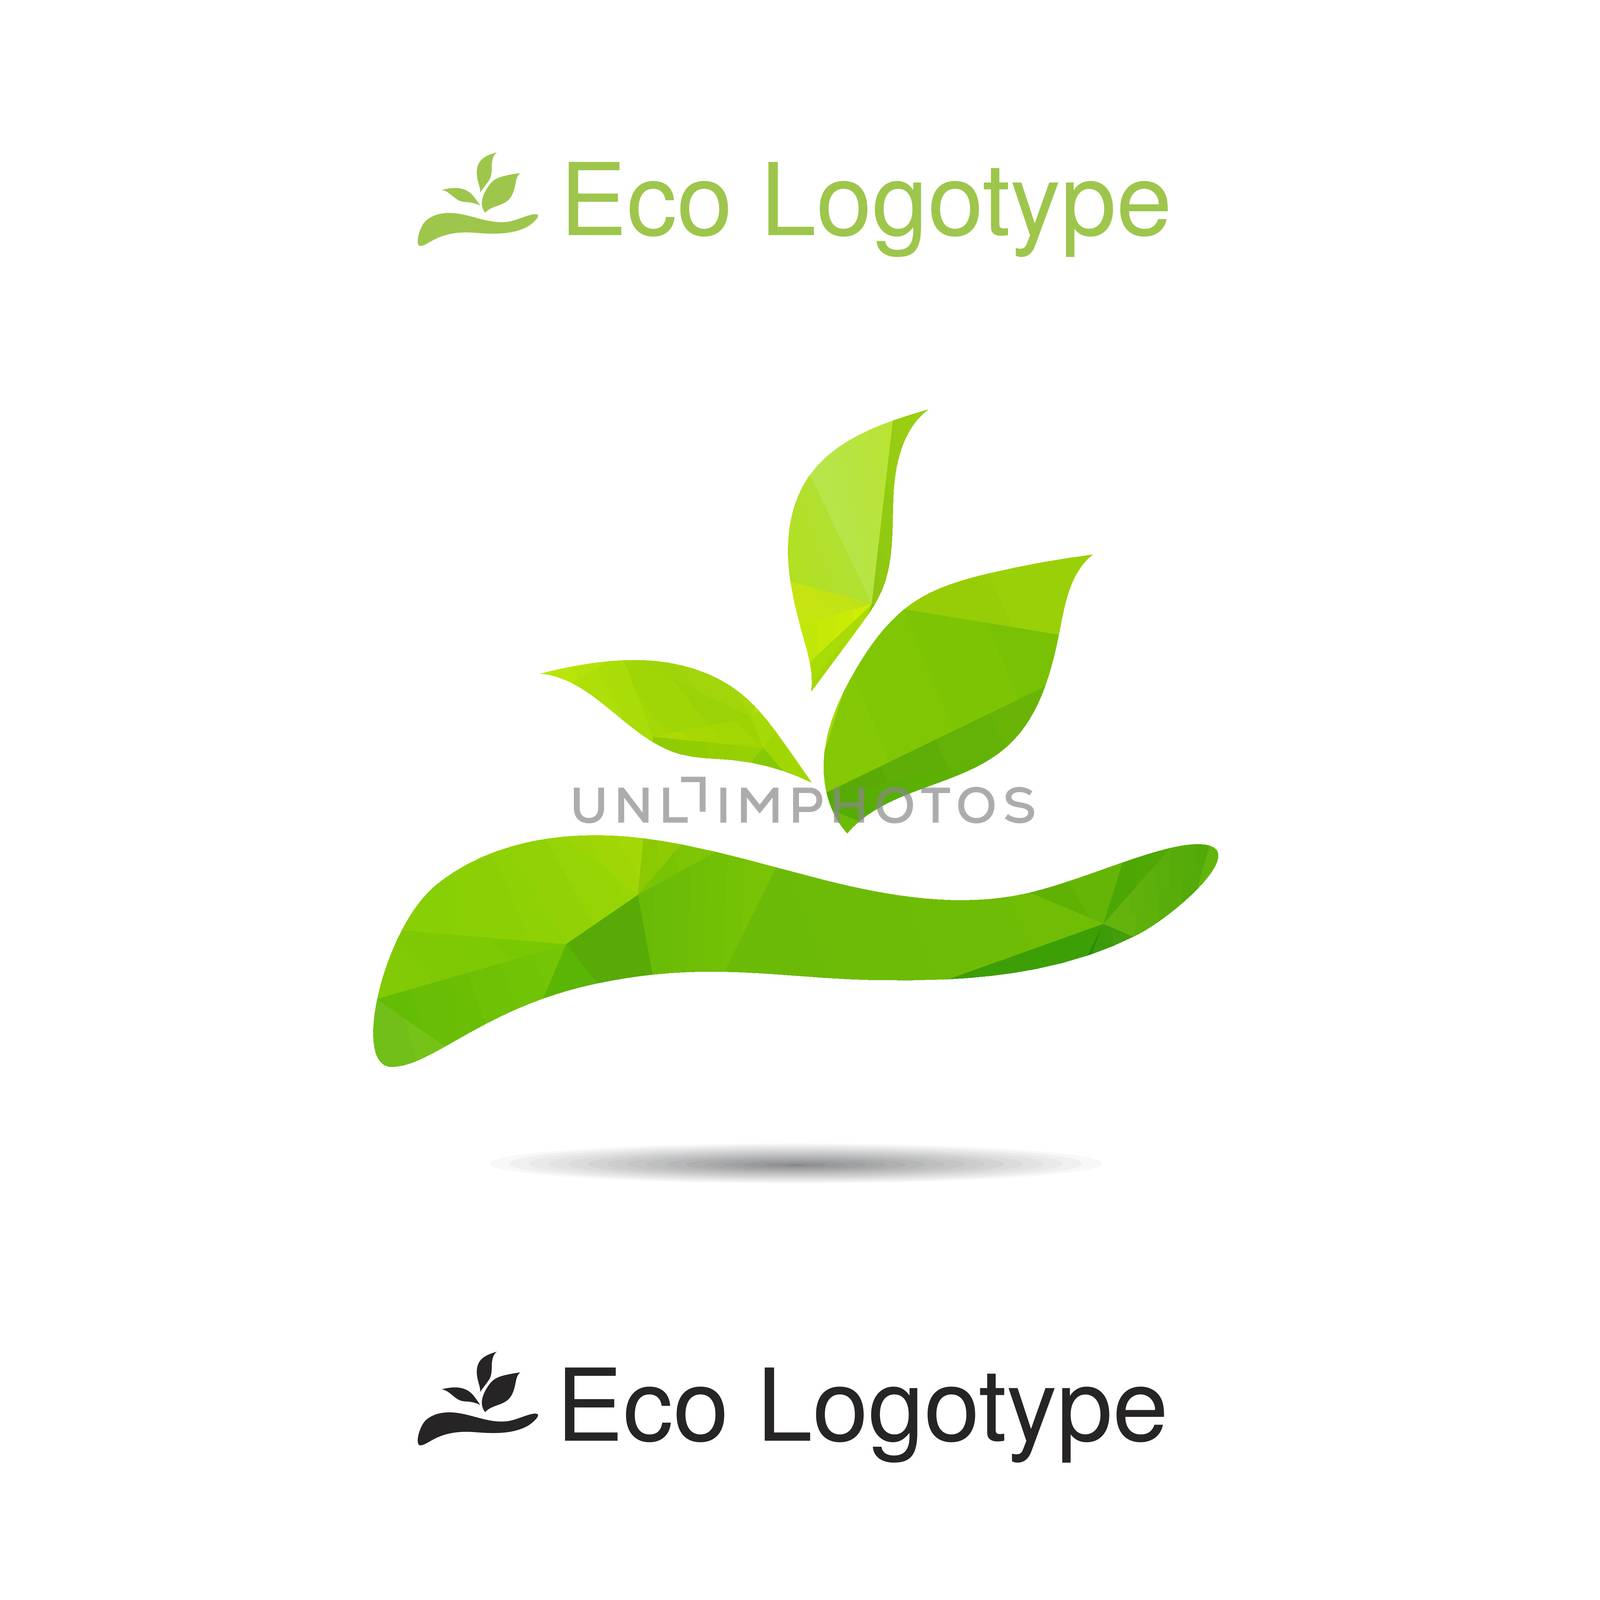 Ecology logo or icon in eps, nature logotype by barsrsind